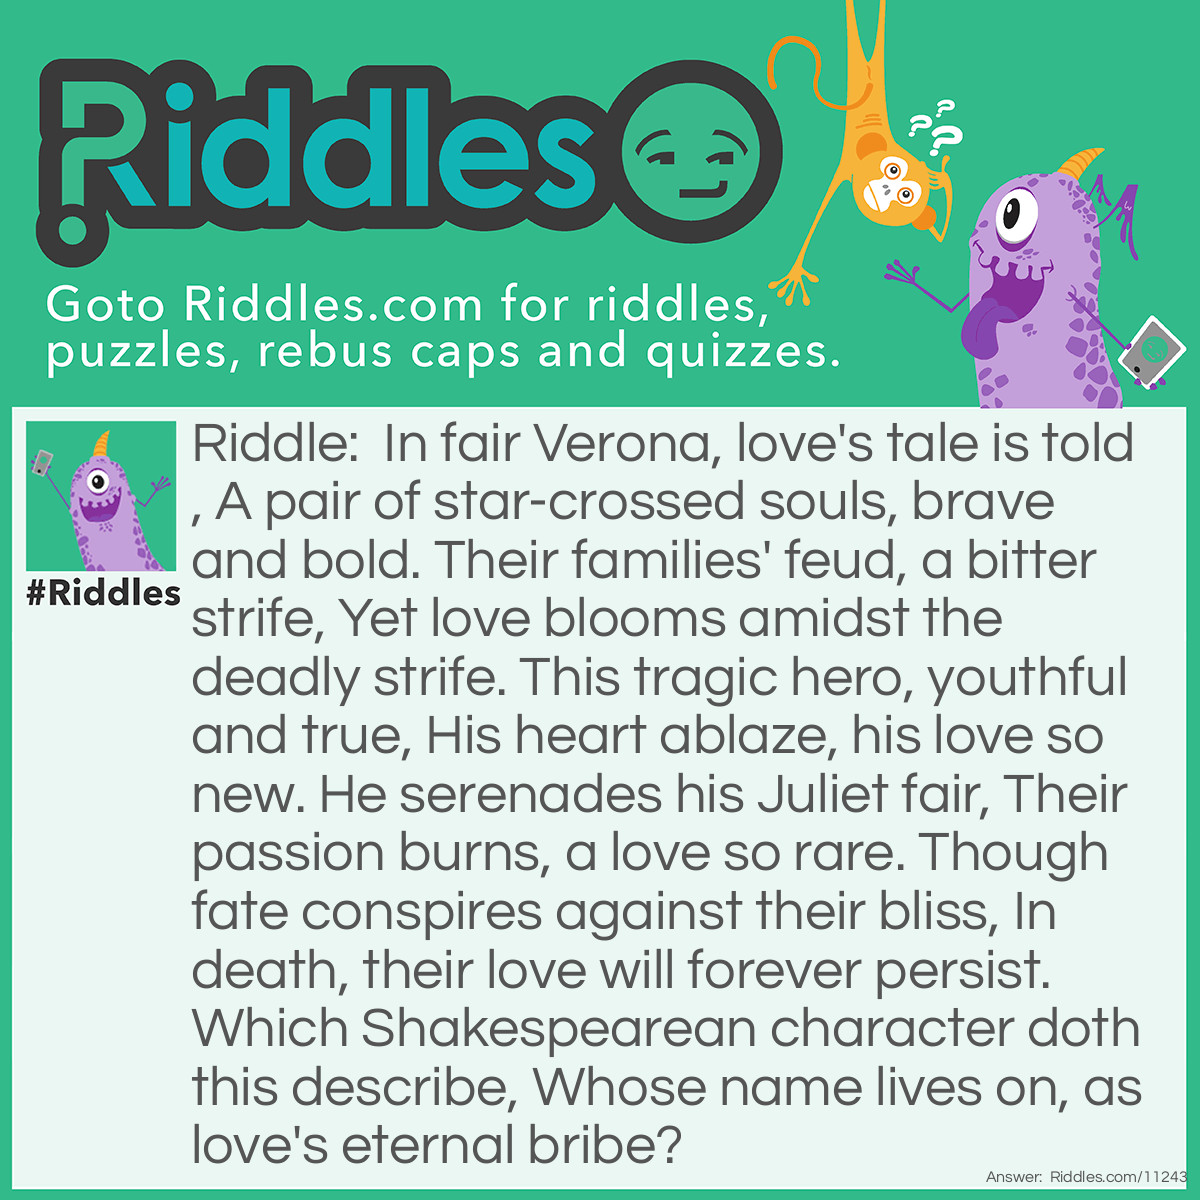 Riddle: In fair Verona, love's tale is told, A pair of star-crossed souls, brave and bold. Their families' feud, a bitter strife, Yet love blooms amidst the deadly strife. This tragic hero, youthful and true, His heart ablaze, his love so new. He serenades his Juliet fair, Their passion burns, a love so rare. Though fate conspires against their bliss, In death, their love will forever persist. Which Shakespearean character doth this describe, Whose name lives on, as love's eternal bribe? Answer: Romeo.